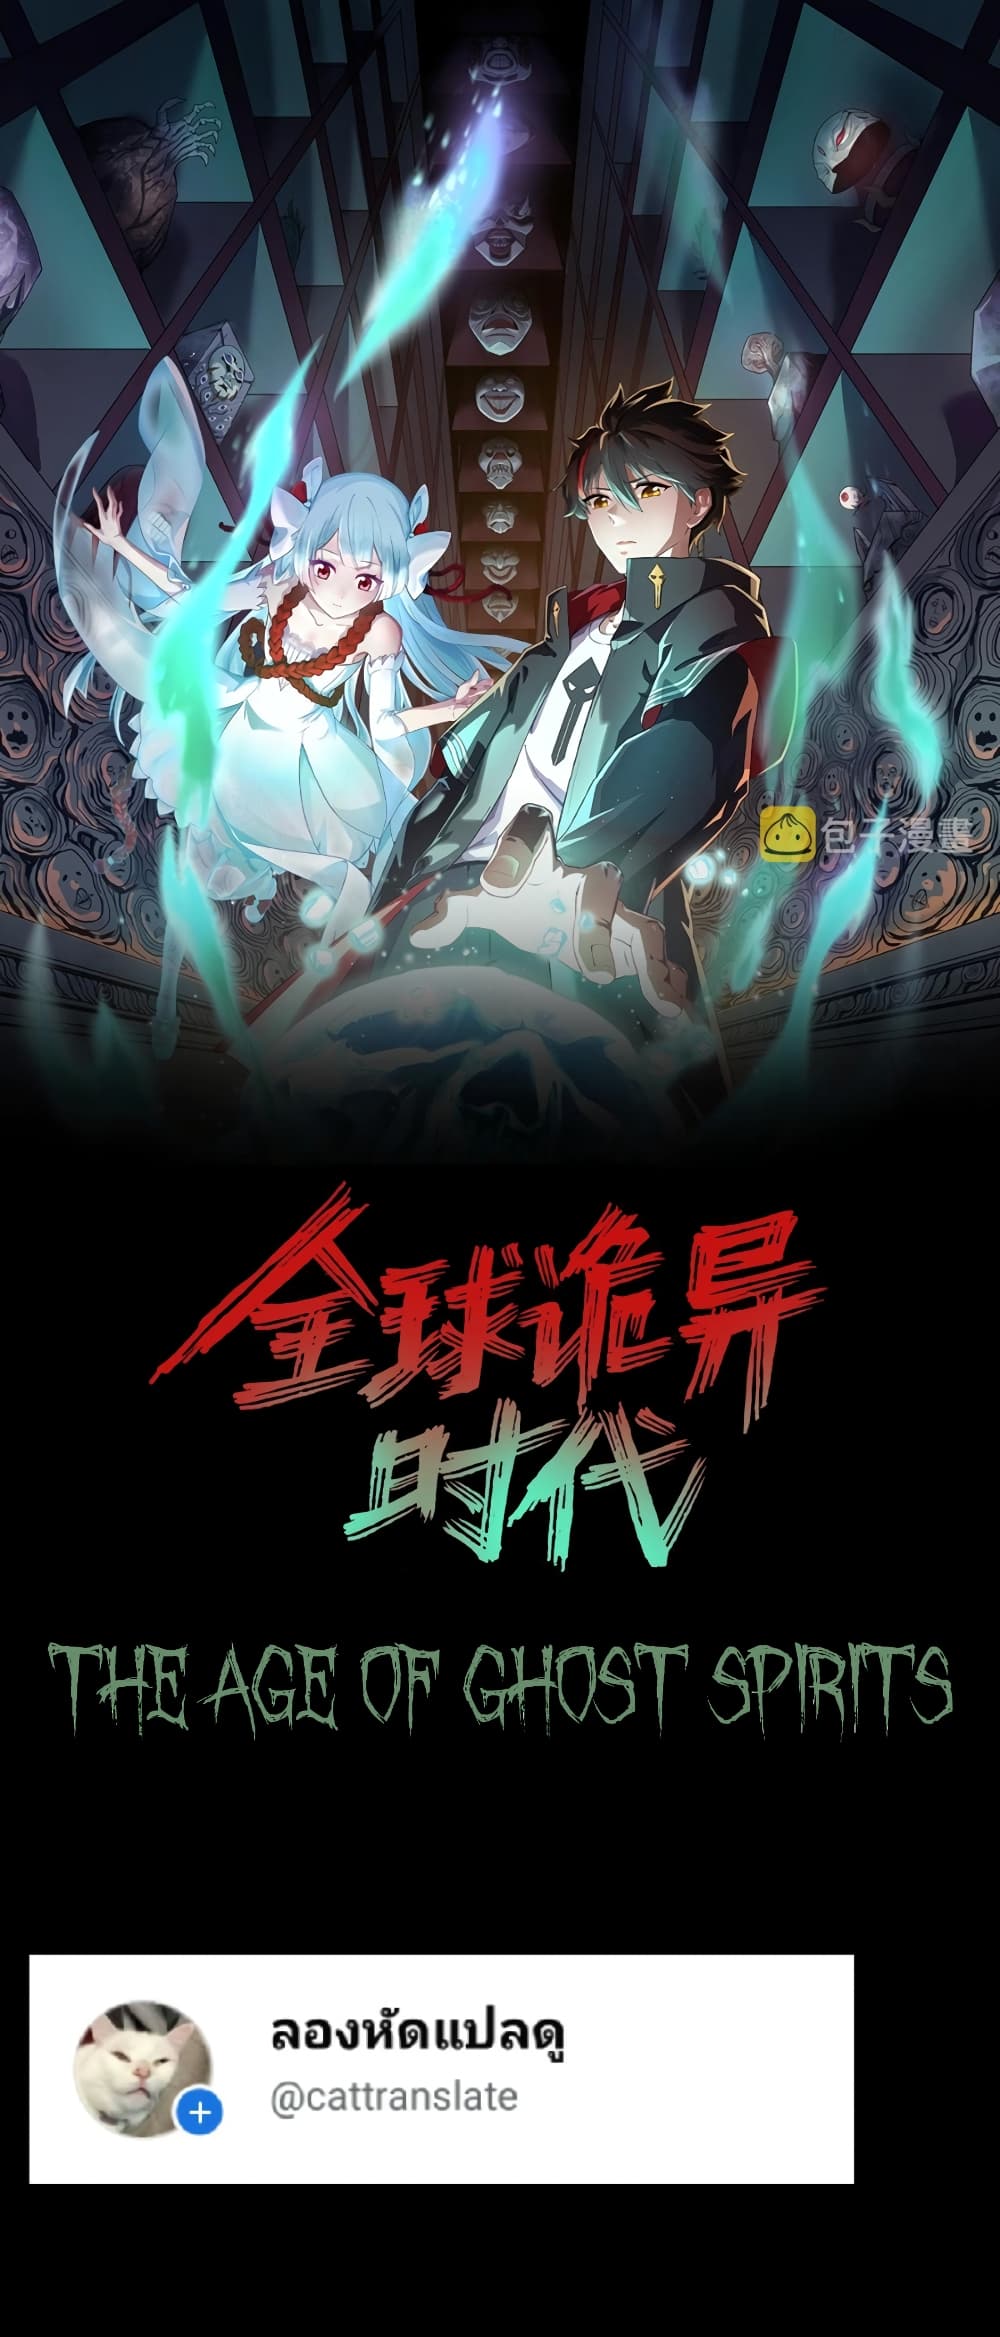 The Age of Ghost Spirits à¸à¸­à¸à¸à¸µà¹ 37 (1)